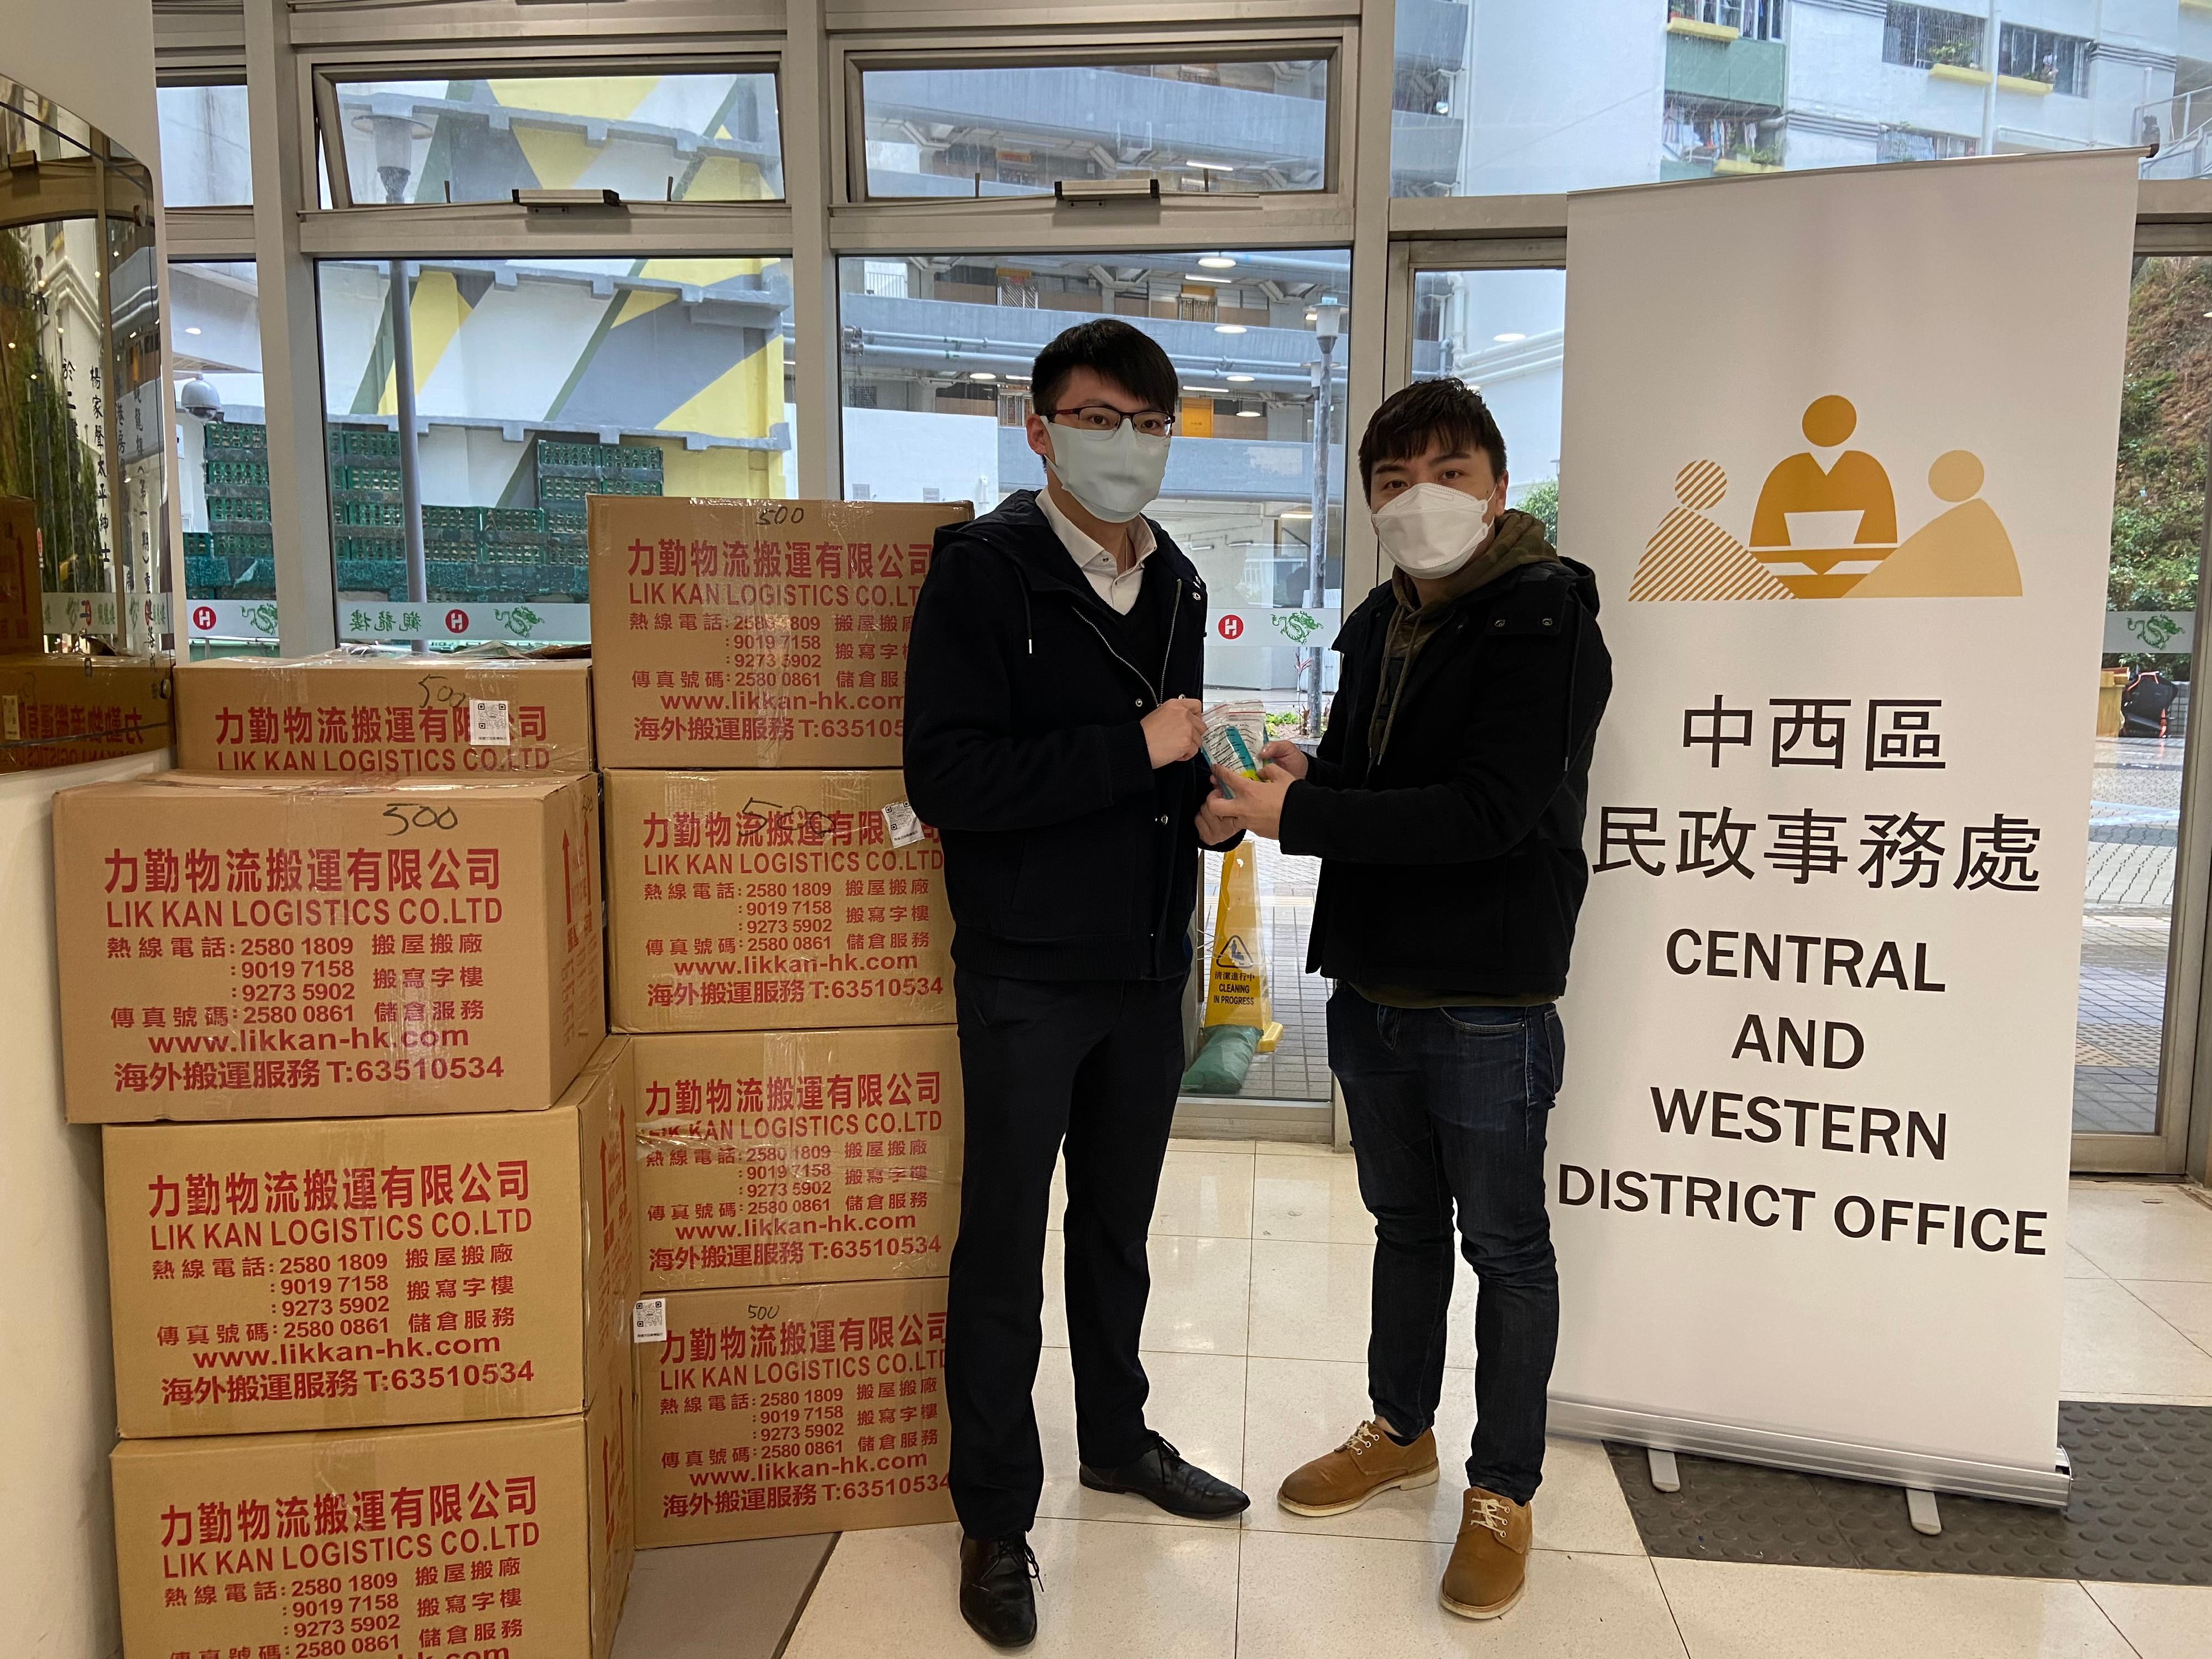 The Central and Western District Office today (February 21) distributed rapid test kits to households, cleansing workers and property management staff living and working in Kwun Lung Lau for voluntary testing through the property management company.